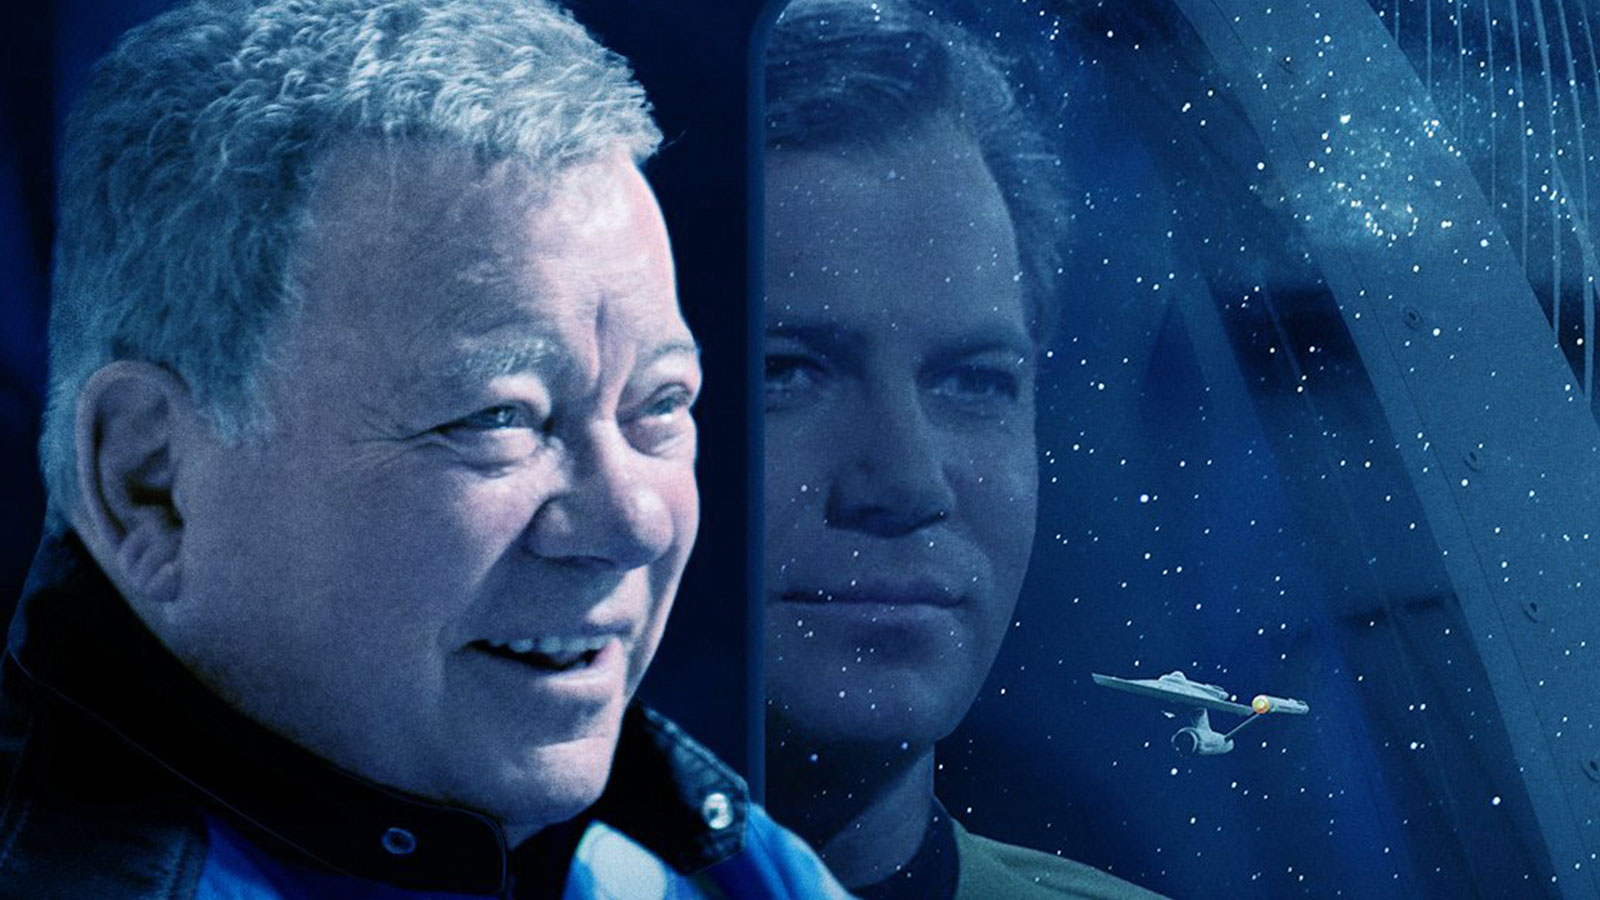 "Shatner In Space" To Debut On Amazon Prime, Documenting William Shatner's Historic Journey To The Edge